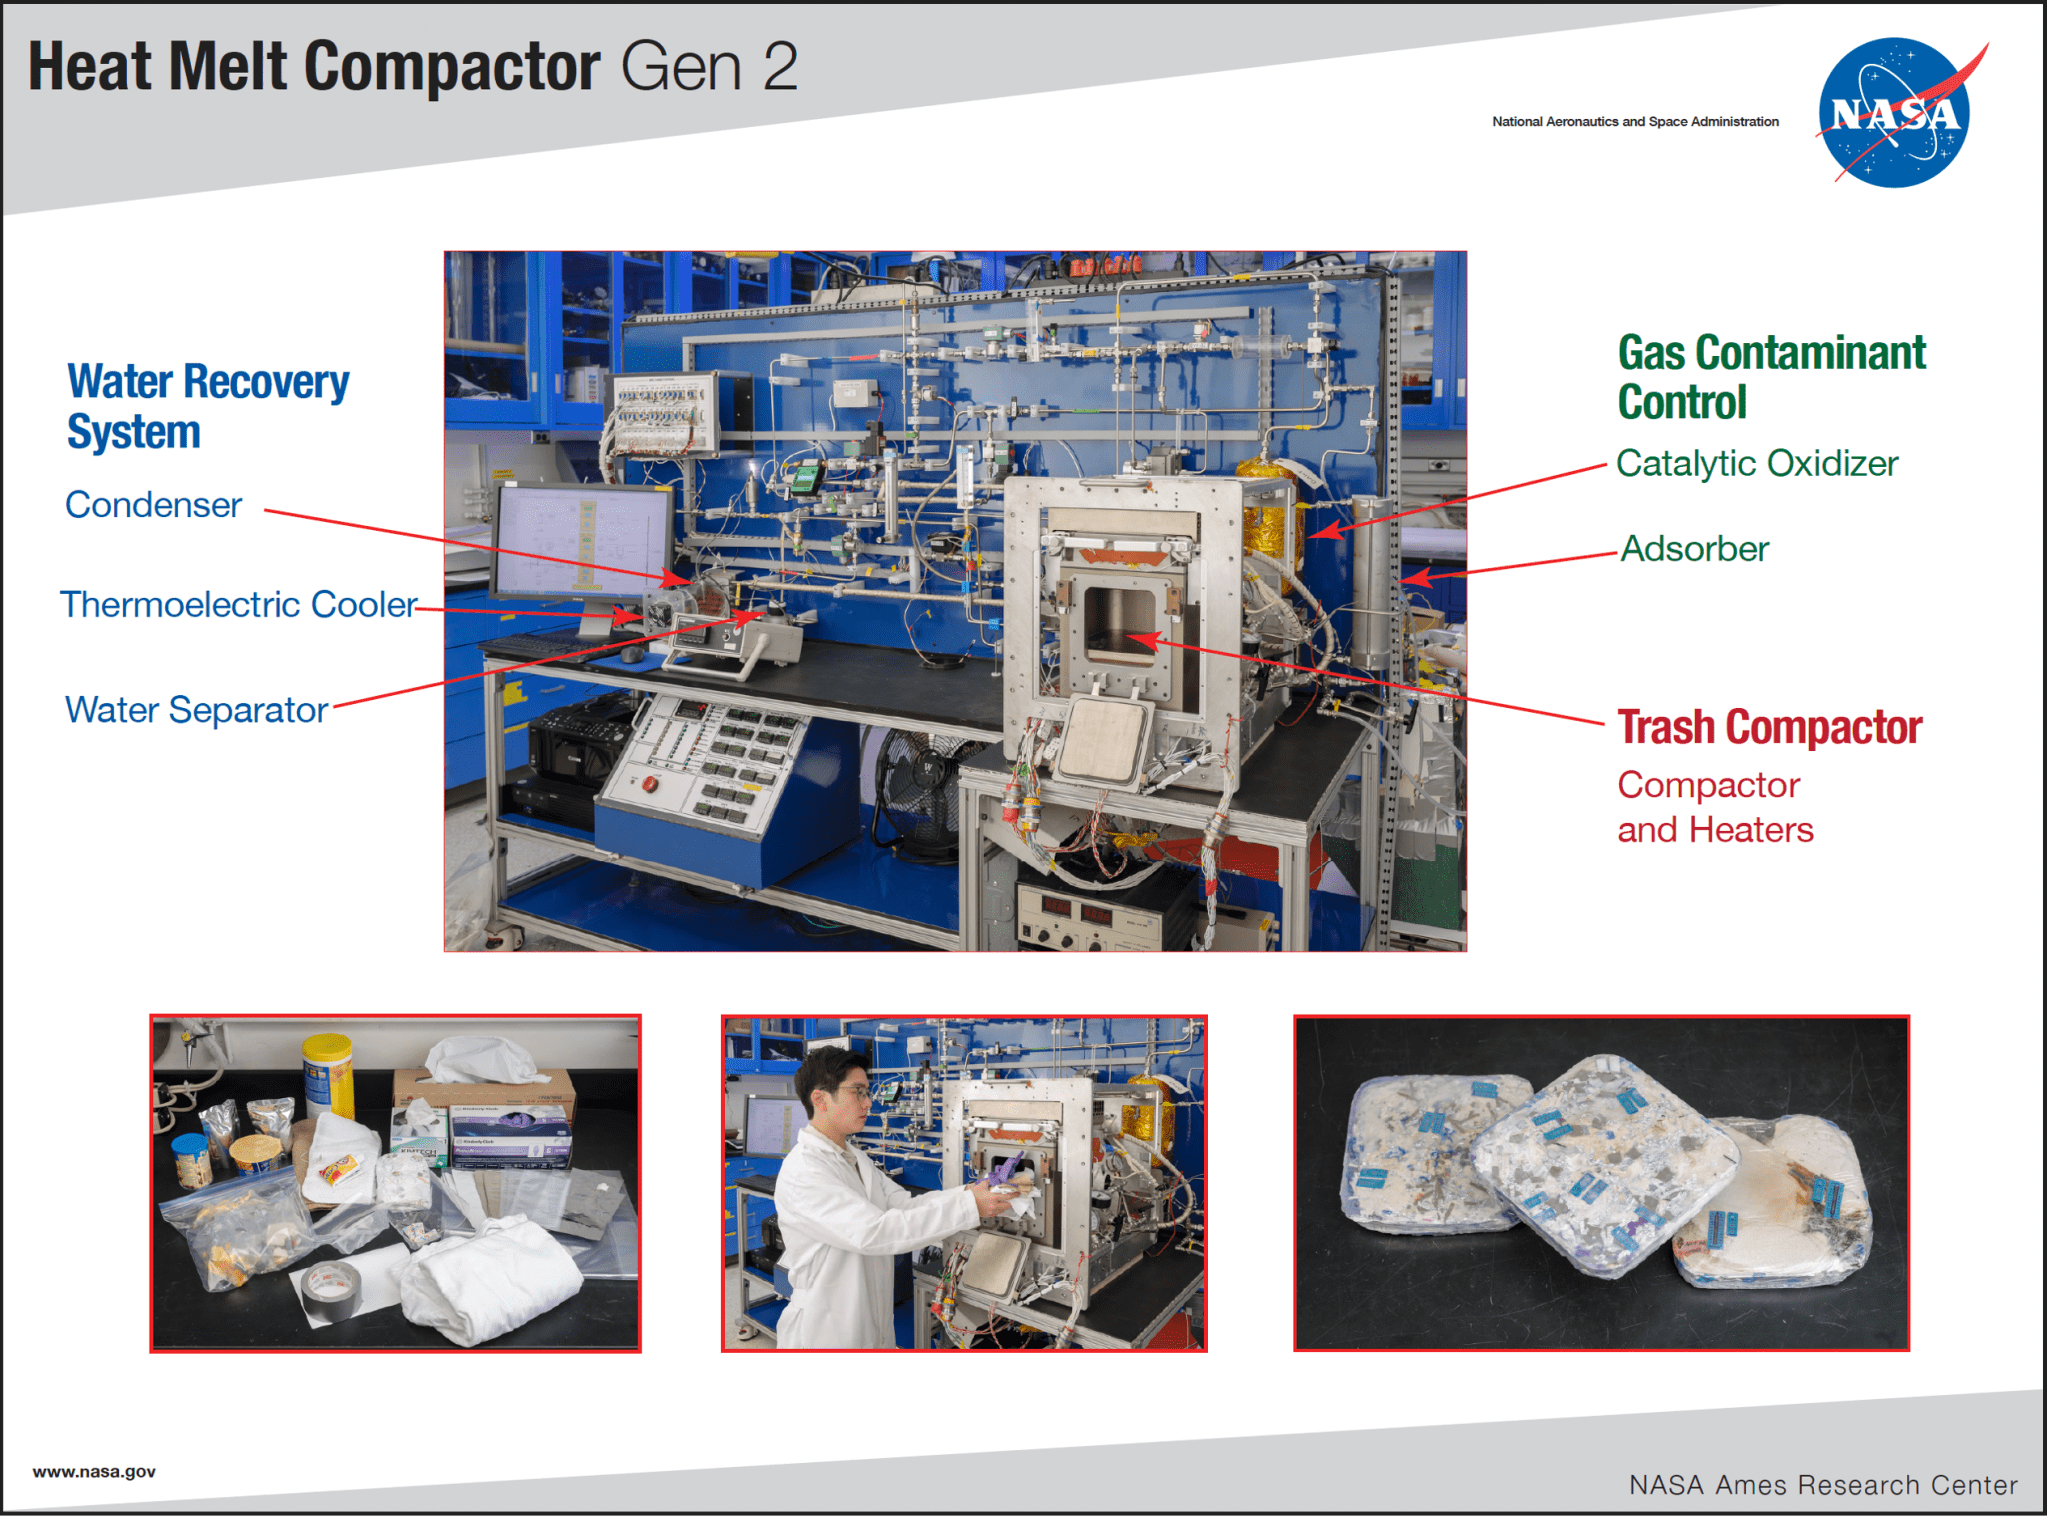 Heat Melt Compactor Gen 2 poster with photos and diagram